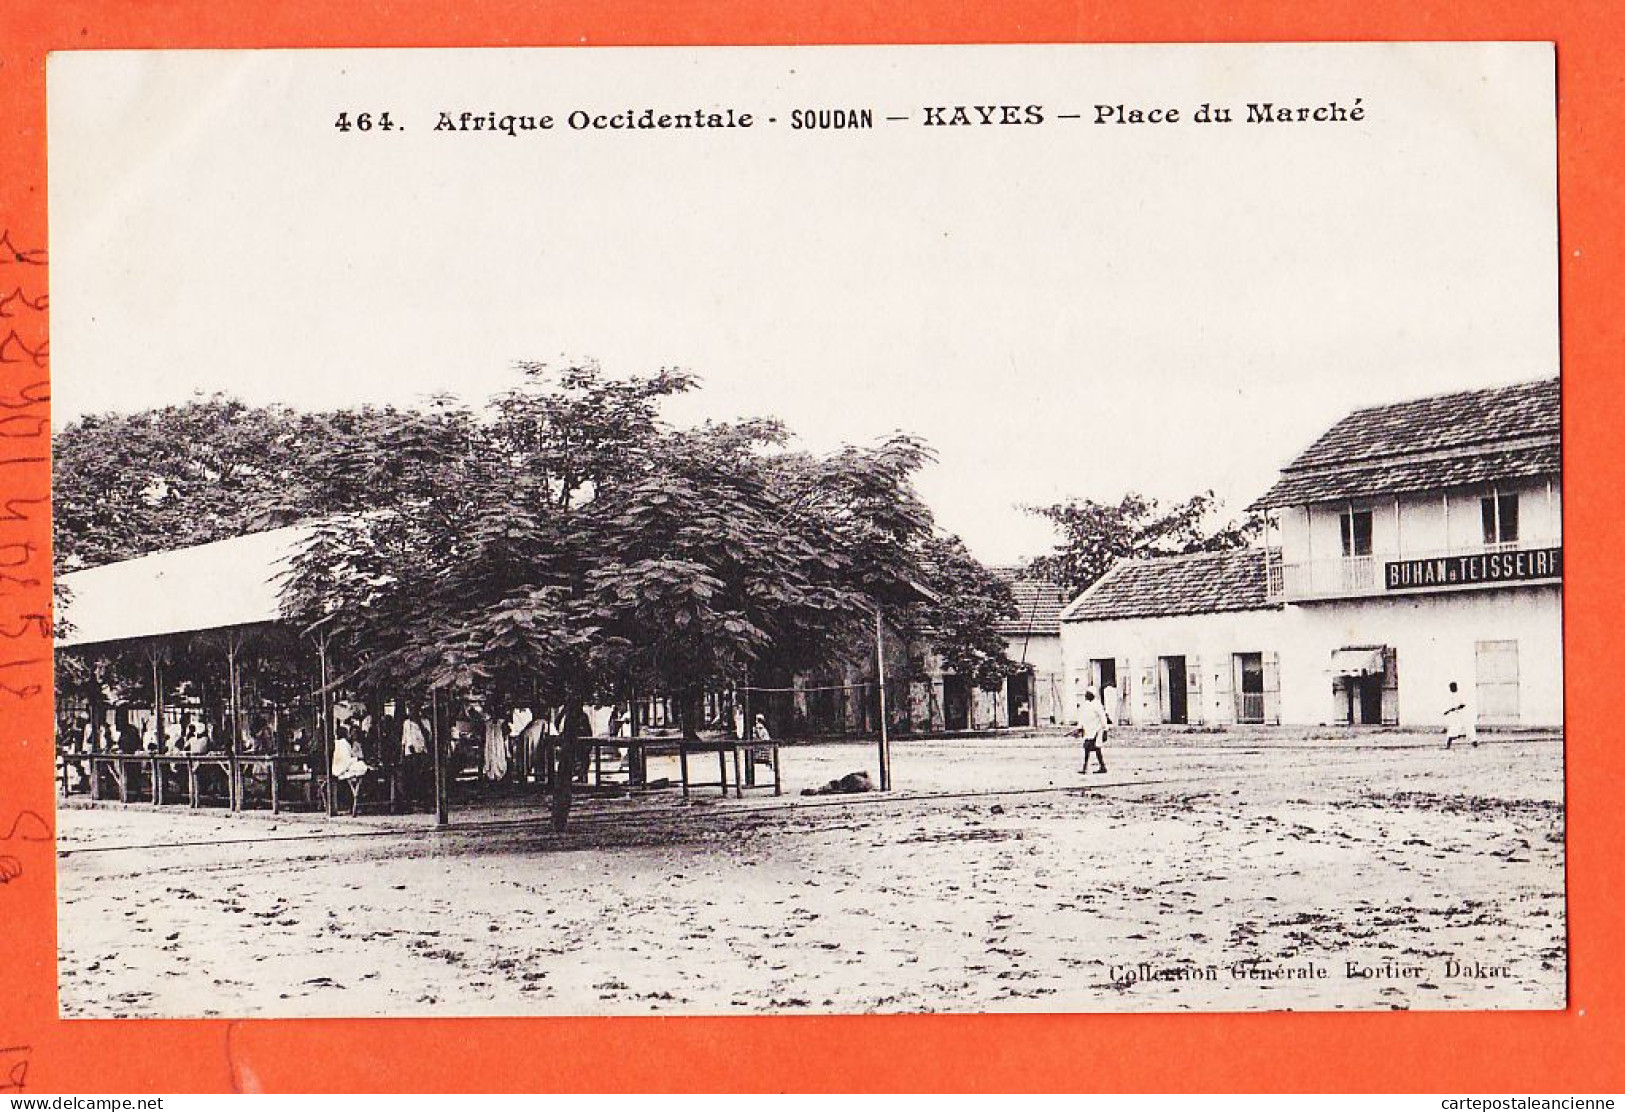 32974 / ♥️ KAYES Soudan (•◡•) BUHAN-TEISSEIRE Place Marché ◉ Collection Generale FORTIER Dakar 464 Afrique Occidentale - Sudan